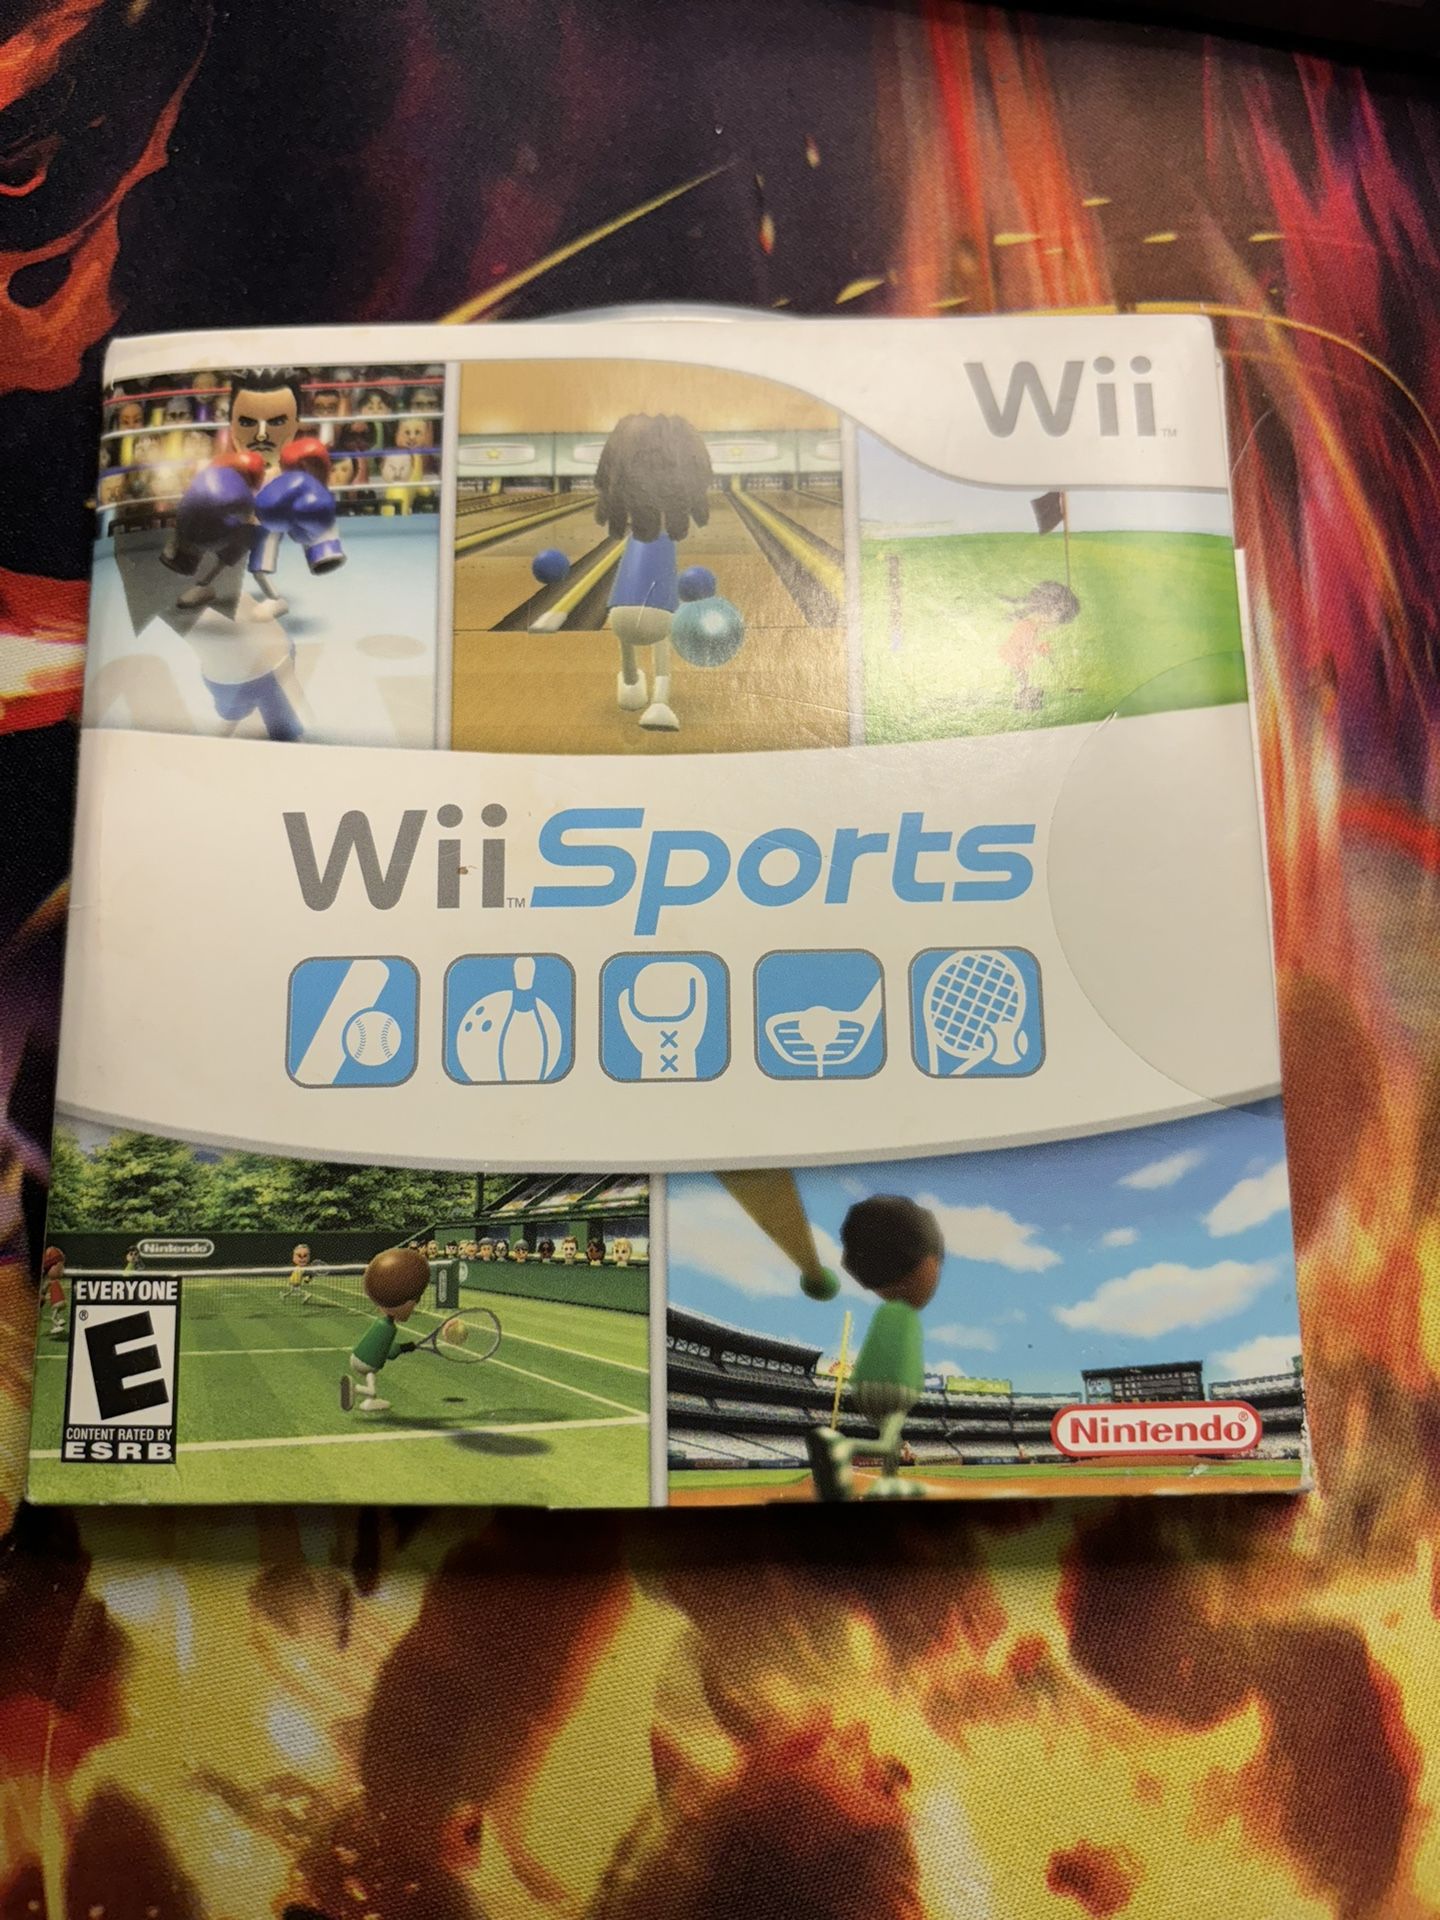 Wii Sports for Nintendo Wii